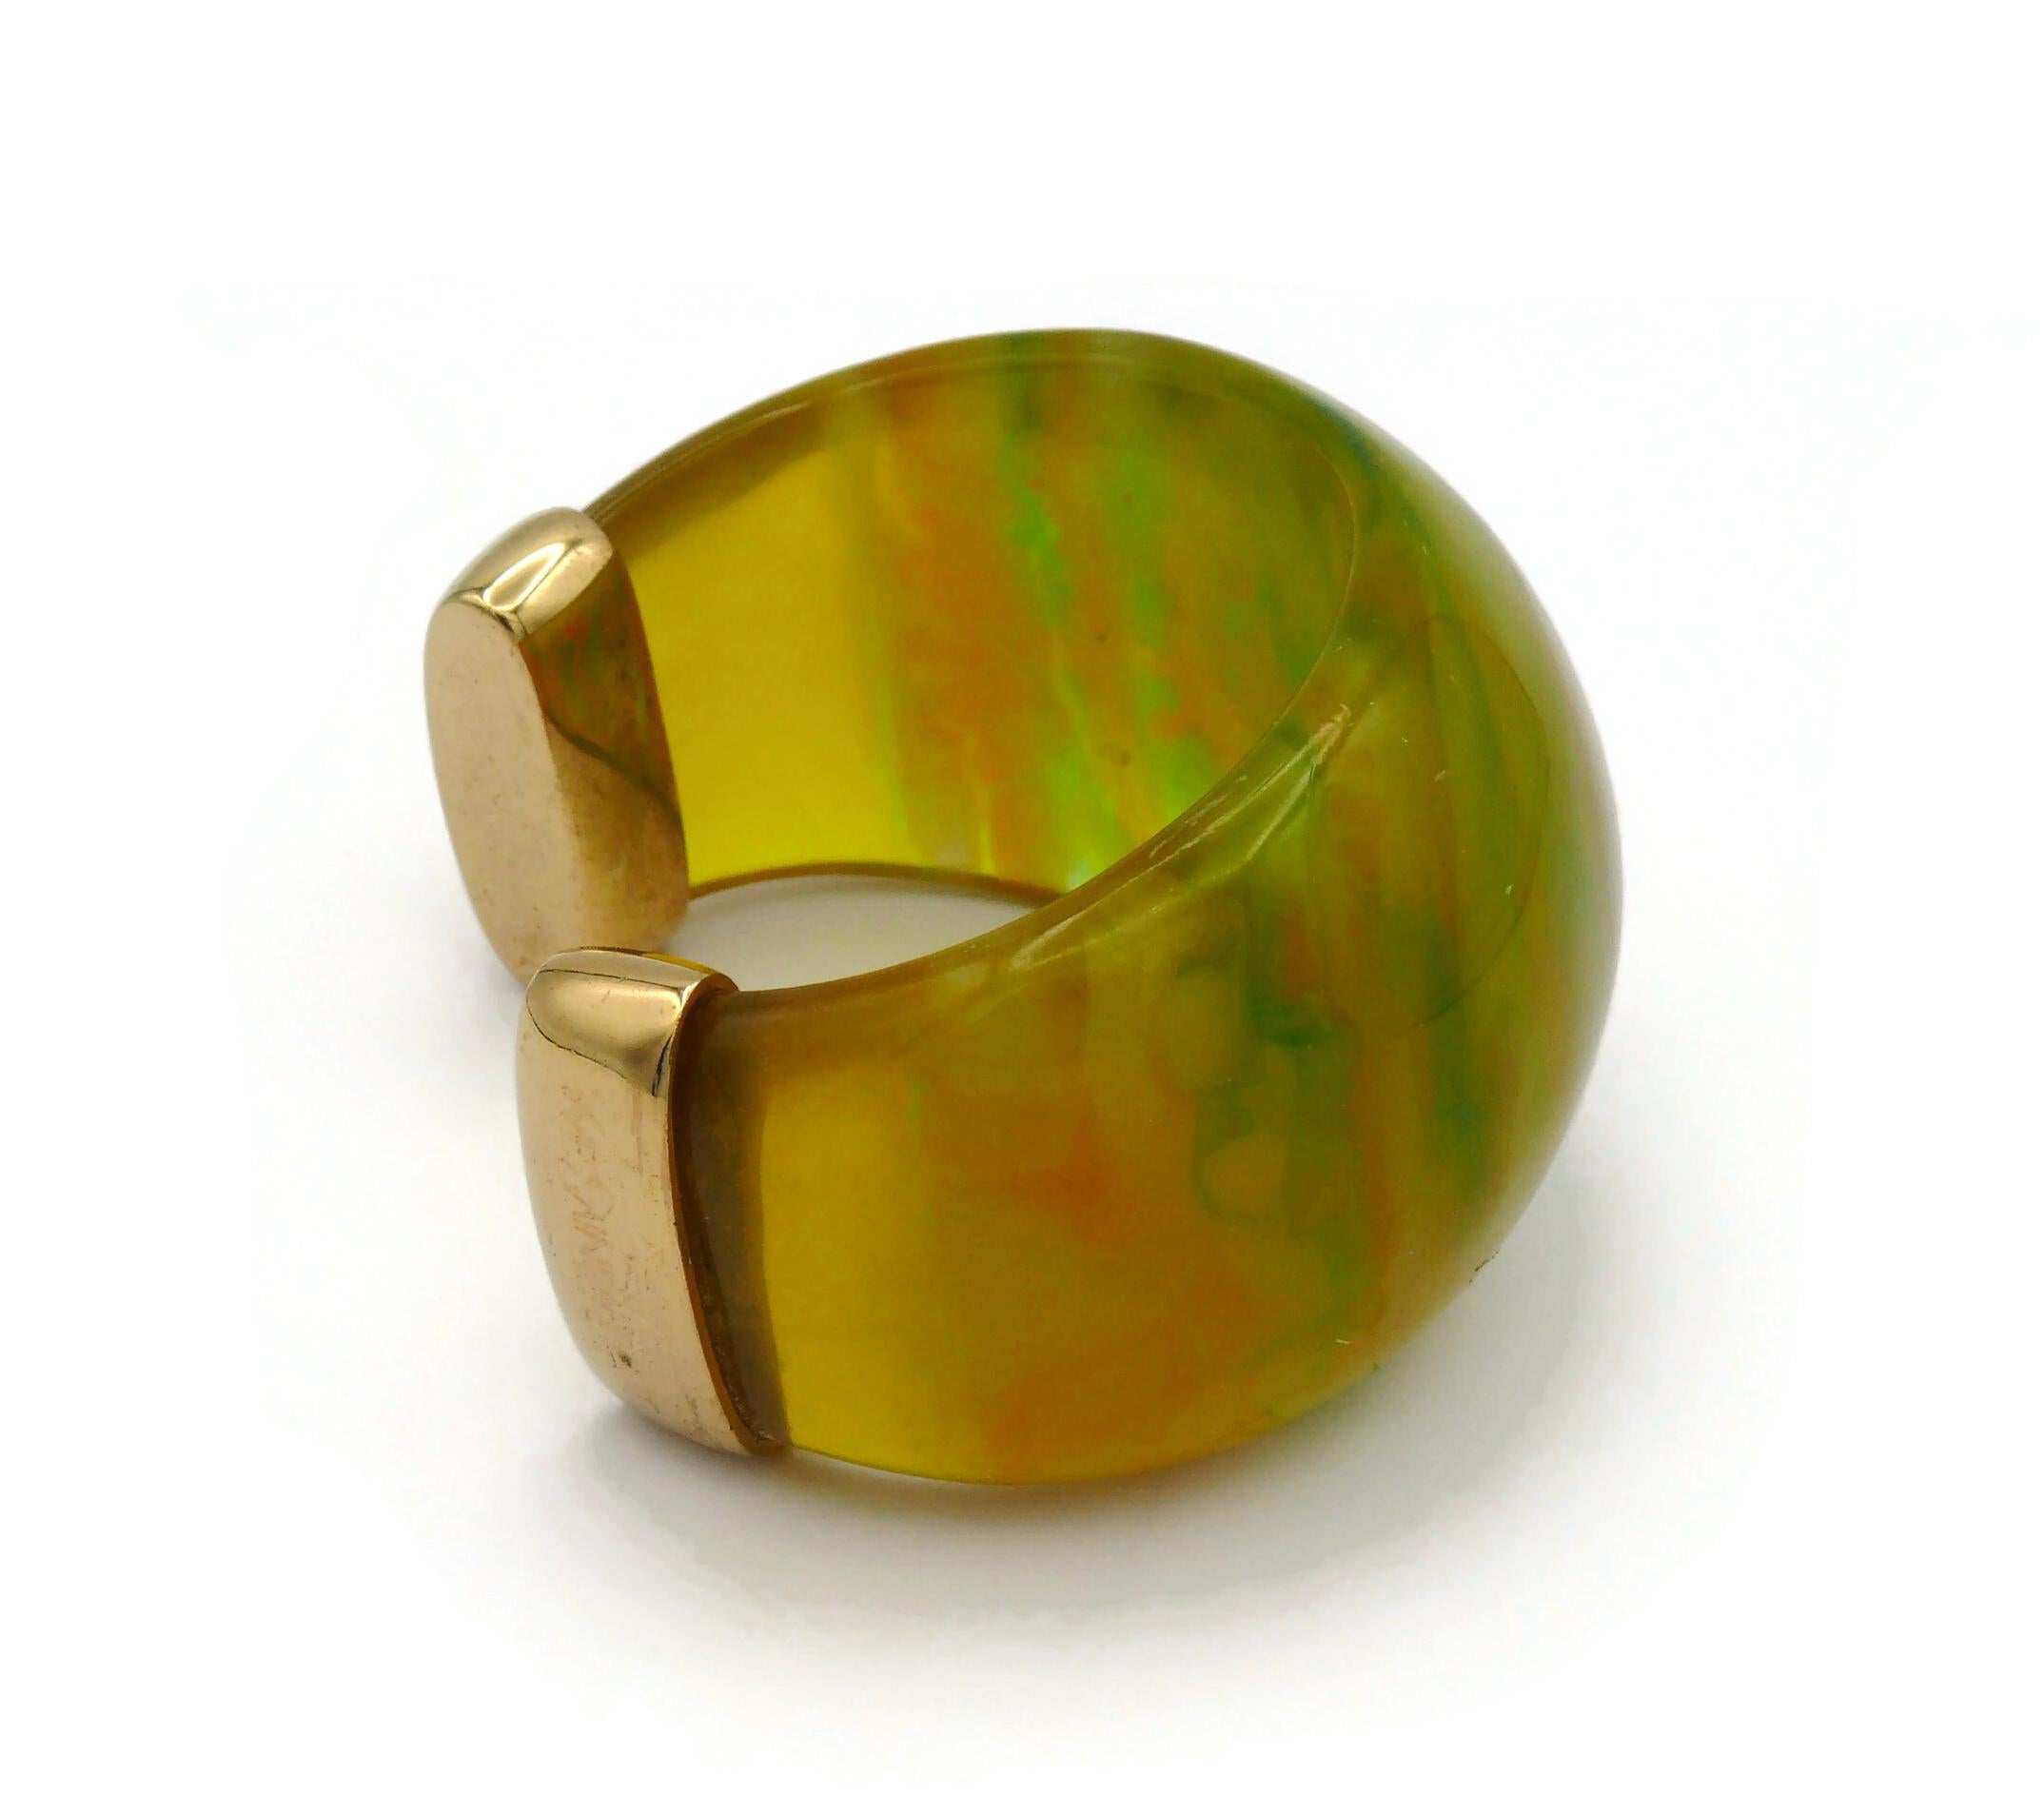 YVES SAINT LAURENT YSL Vintage Yellow Green Marbled Resin Cuff Bracelet For Sale 6